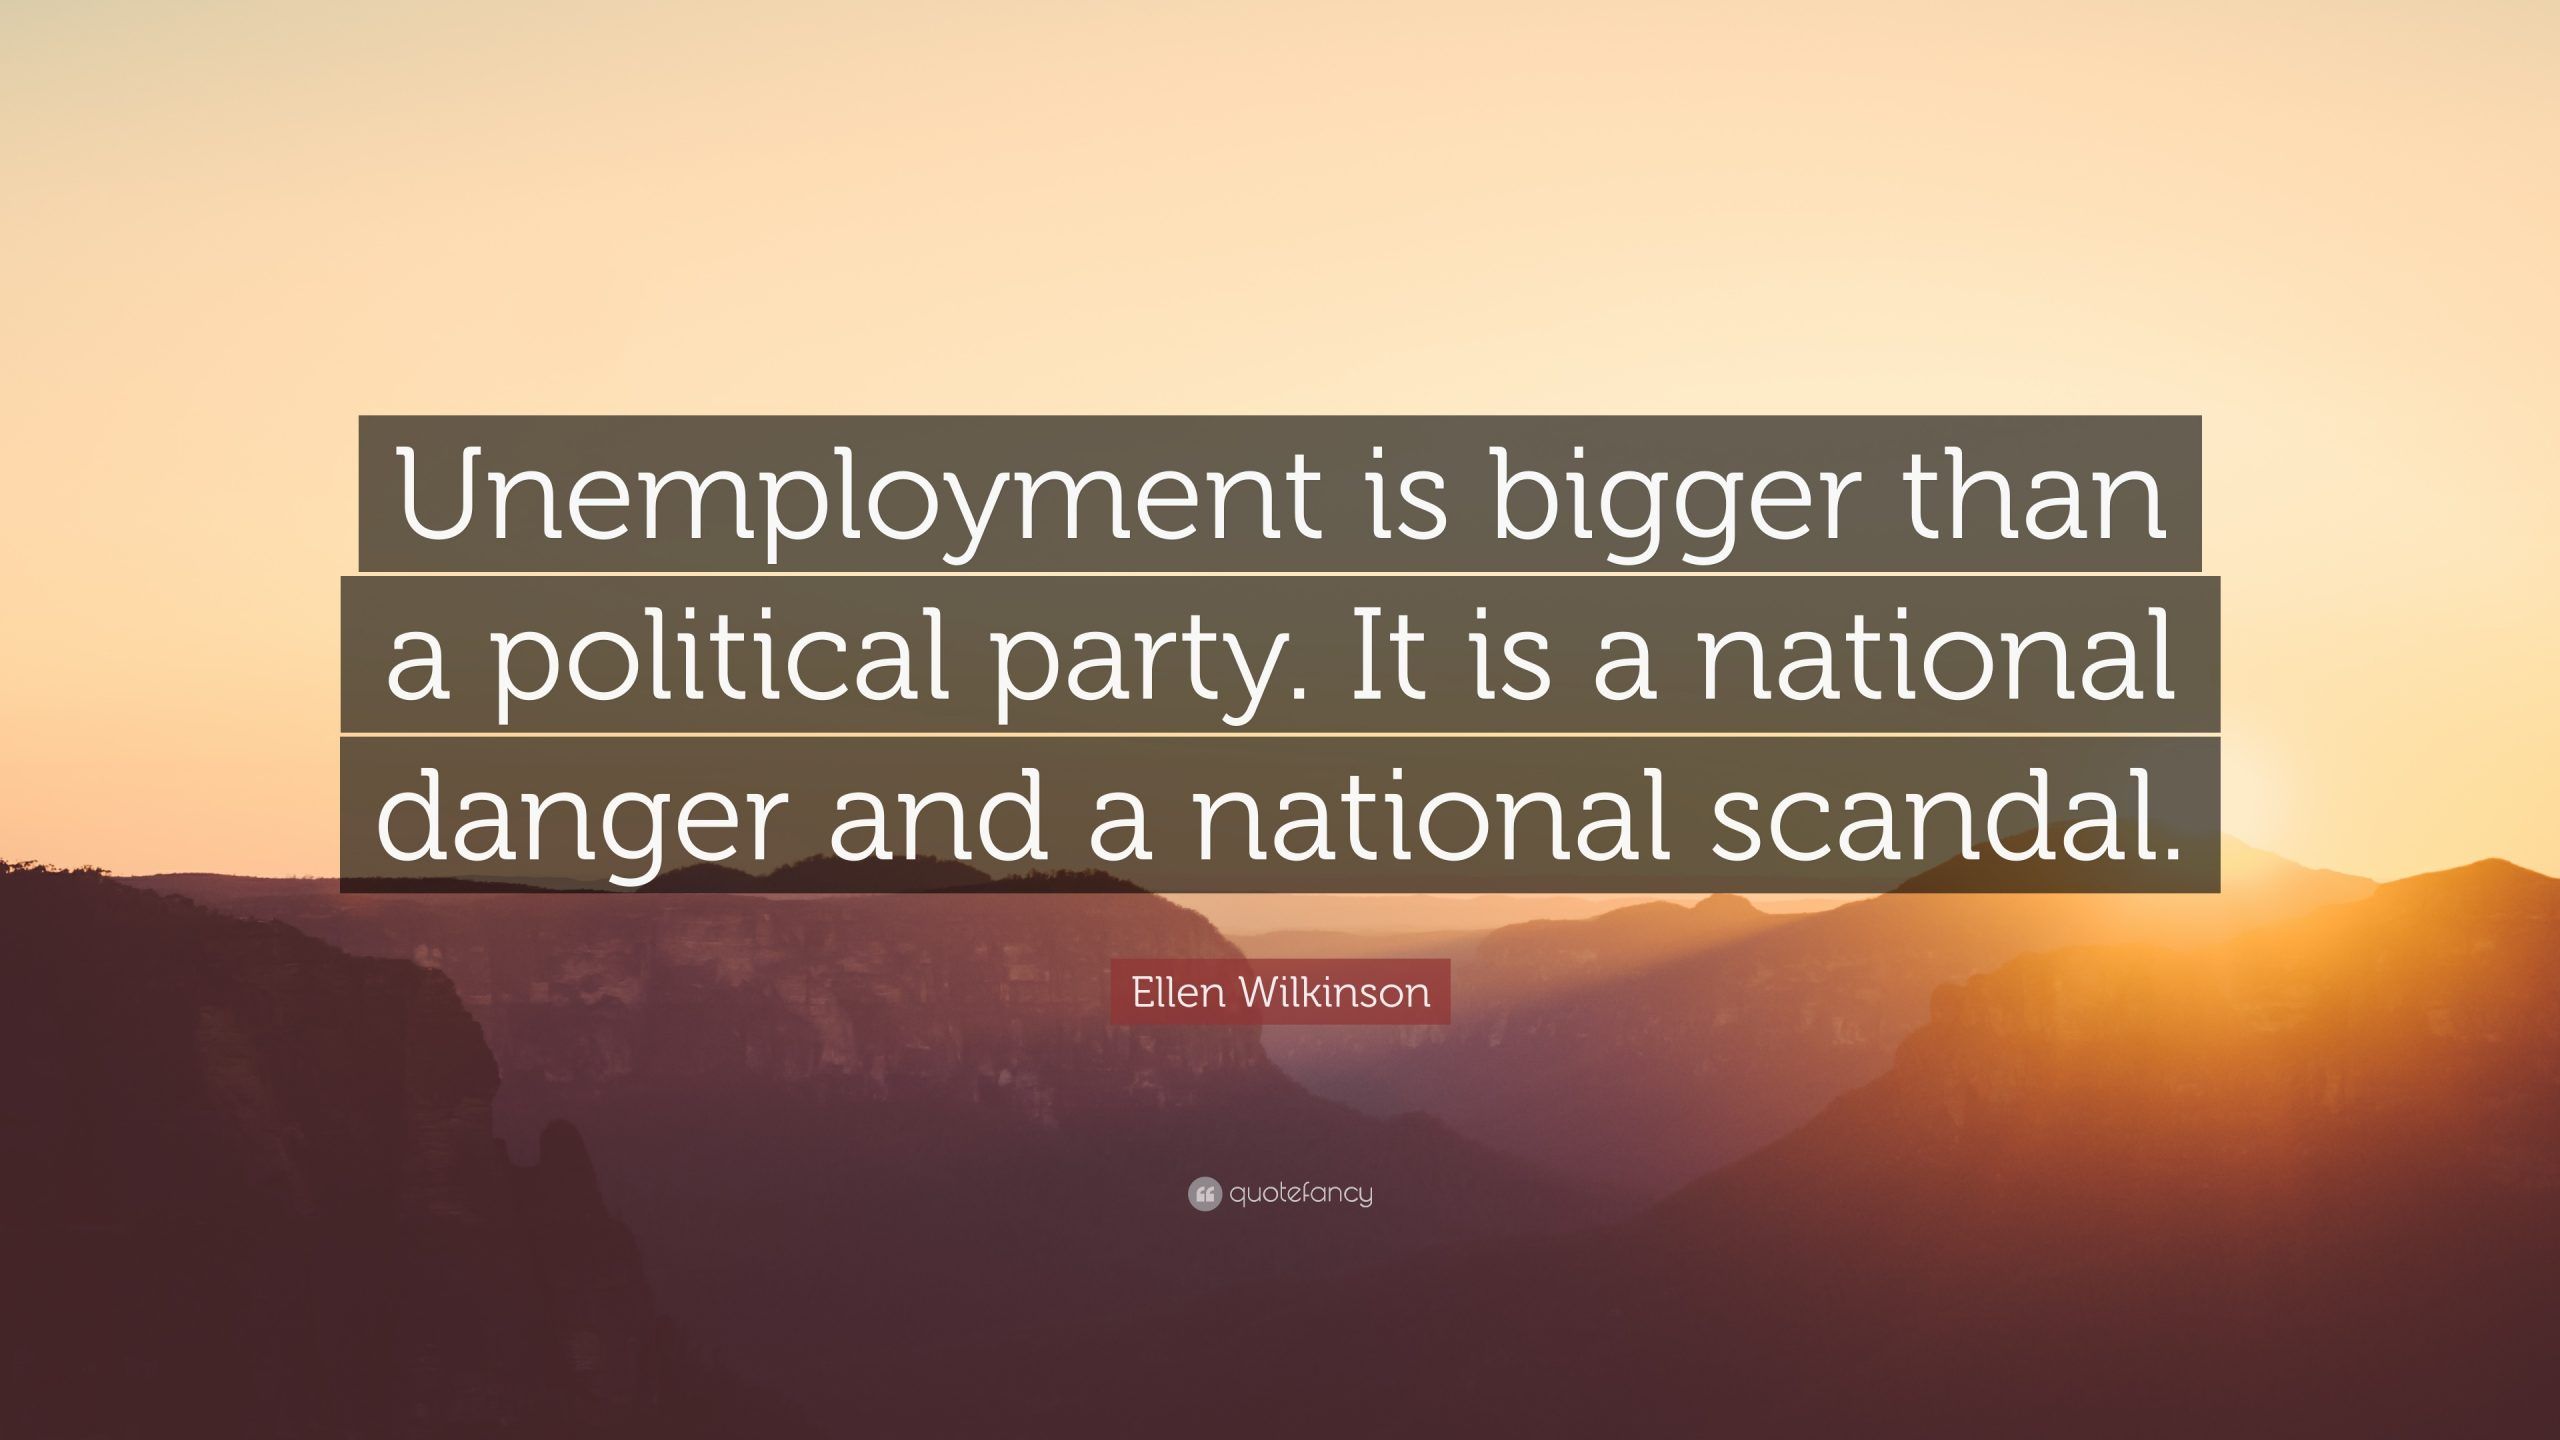 Quotes Ellen Wilkinson Quote E2809cunemployment Is Bigger Than Political Party It National Danger And Scandal Wallpaper Quotefancy Quotes Unemployment 45 Unemployment Quote Image Ideas